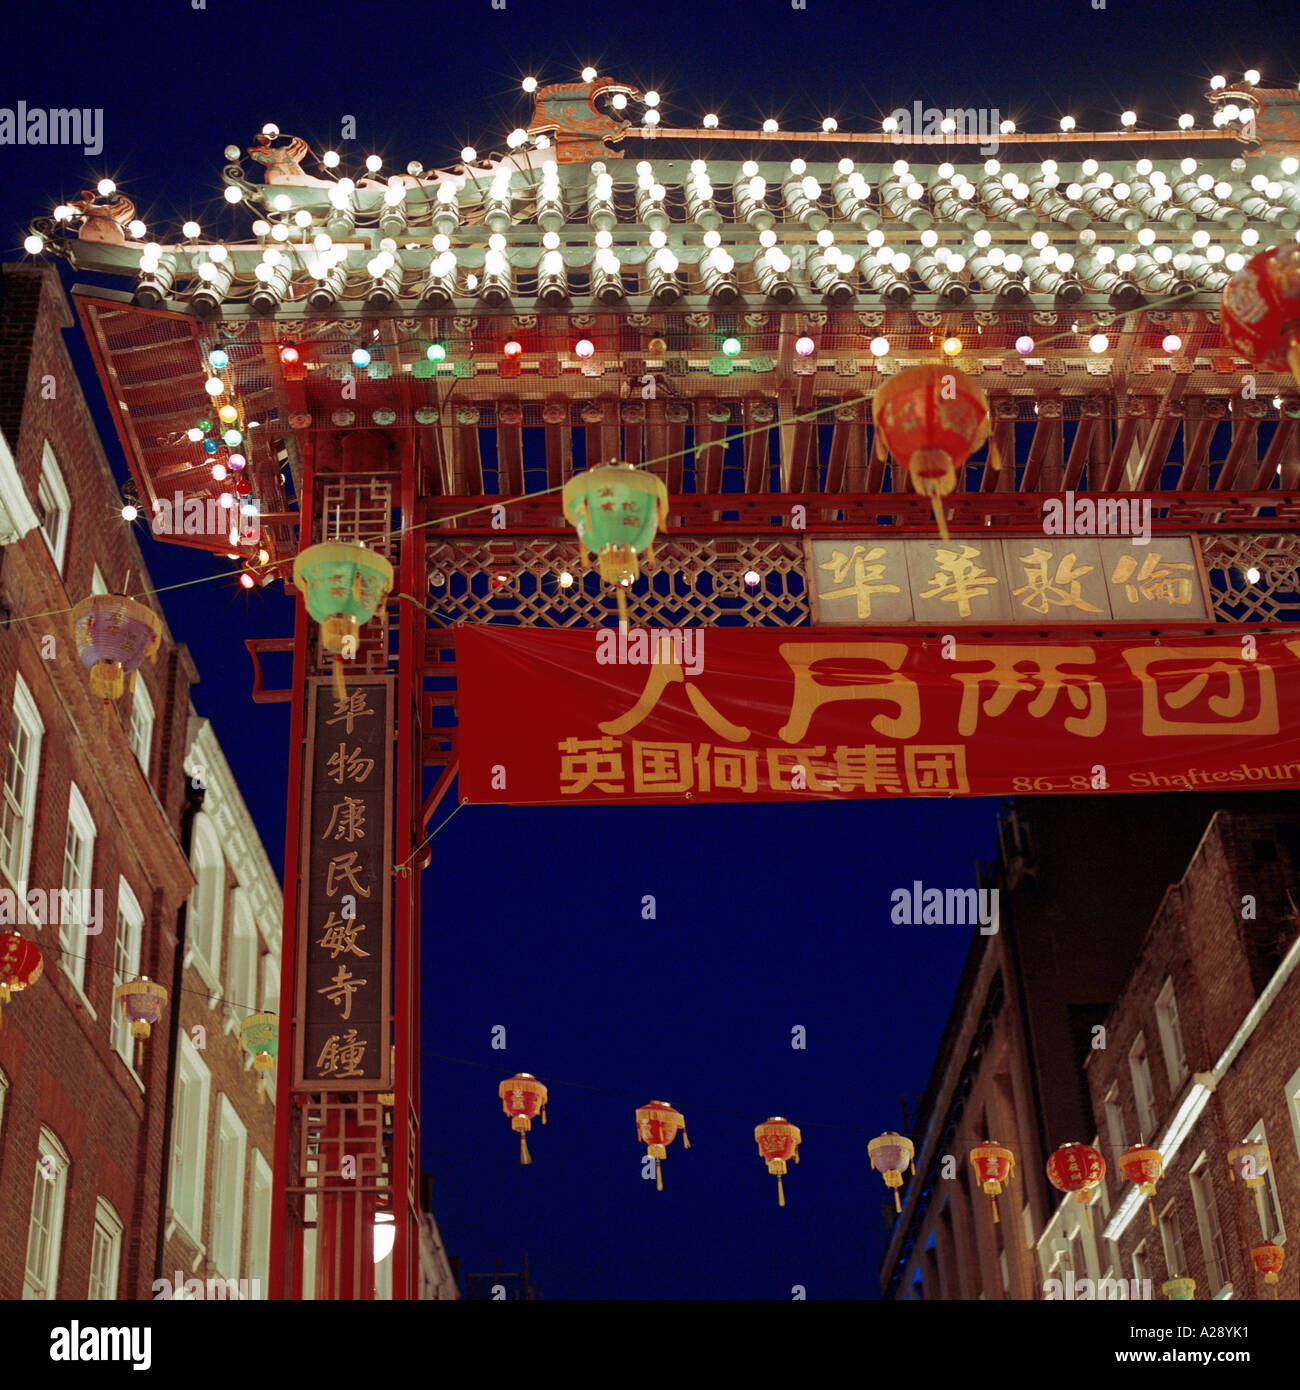 Dusk shot of Chinatown, Gerrard Street, Westminster, London, during Chinese New Year; inc. ceremonial gate, lanterns, flags, shop-fronts Stock Photo